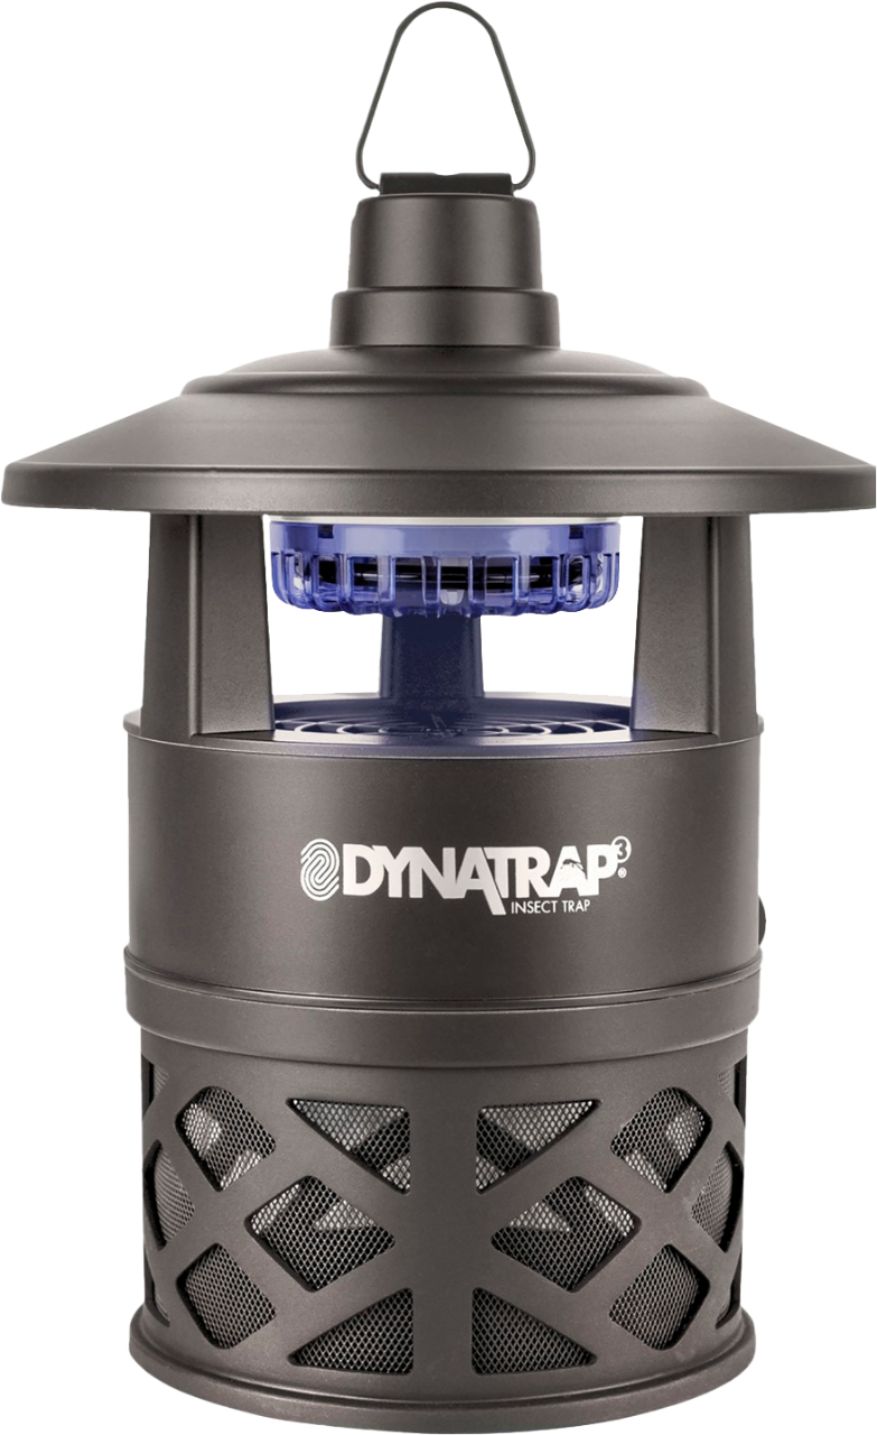 Decora Series Ultralight Outdoor Insect Trap - Tungsten